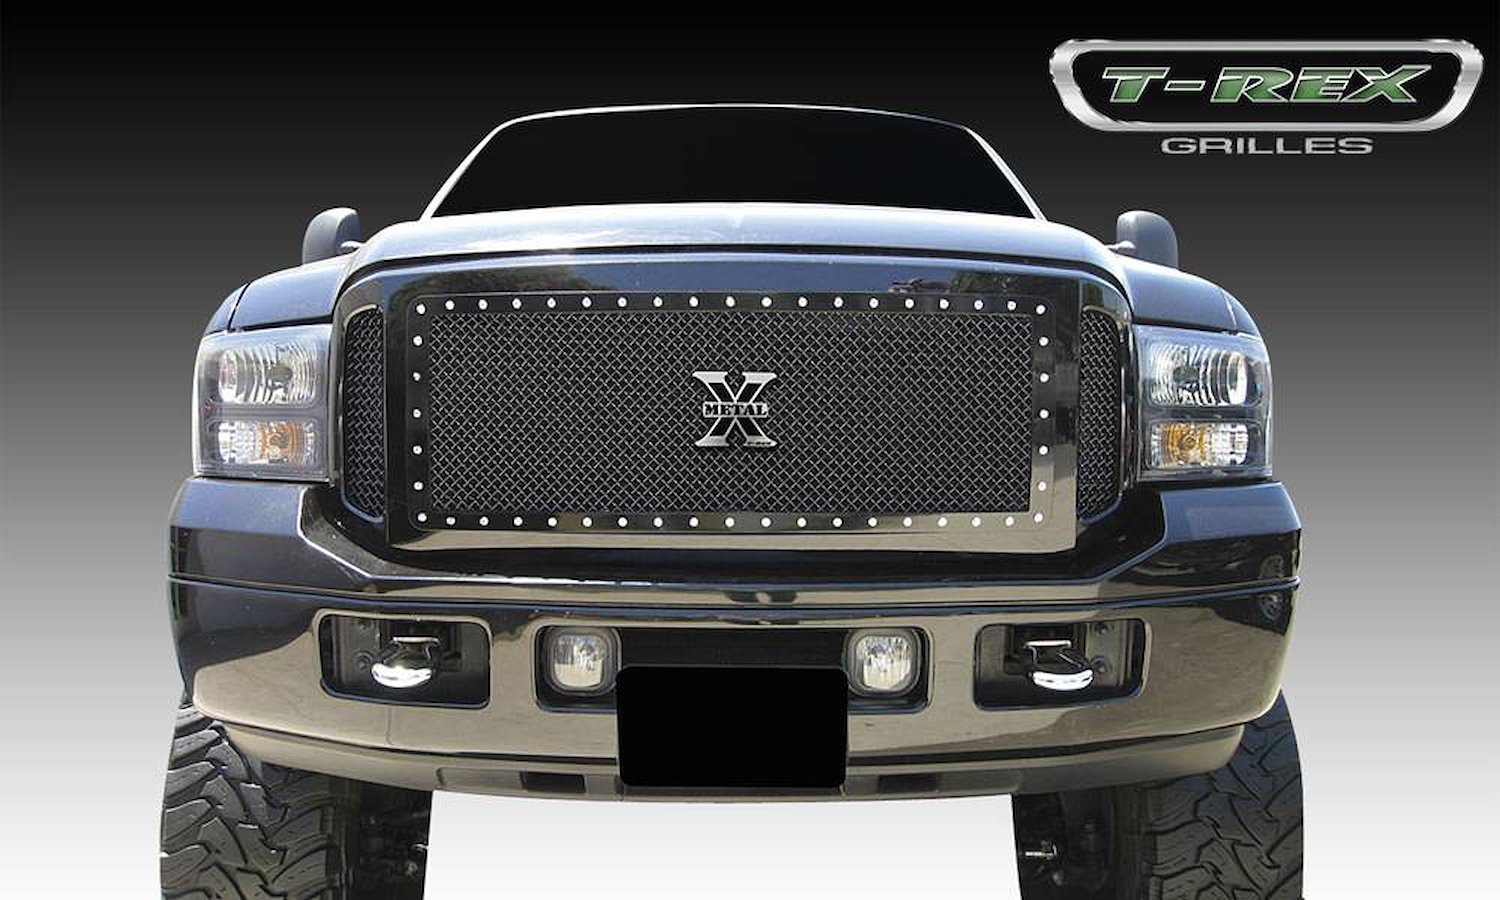 X-Metal Studded Mesh Grille 2005-2007 F-250/F-350 SD